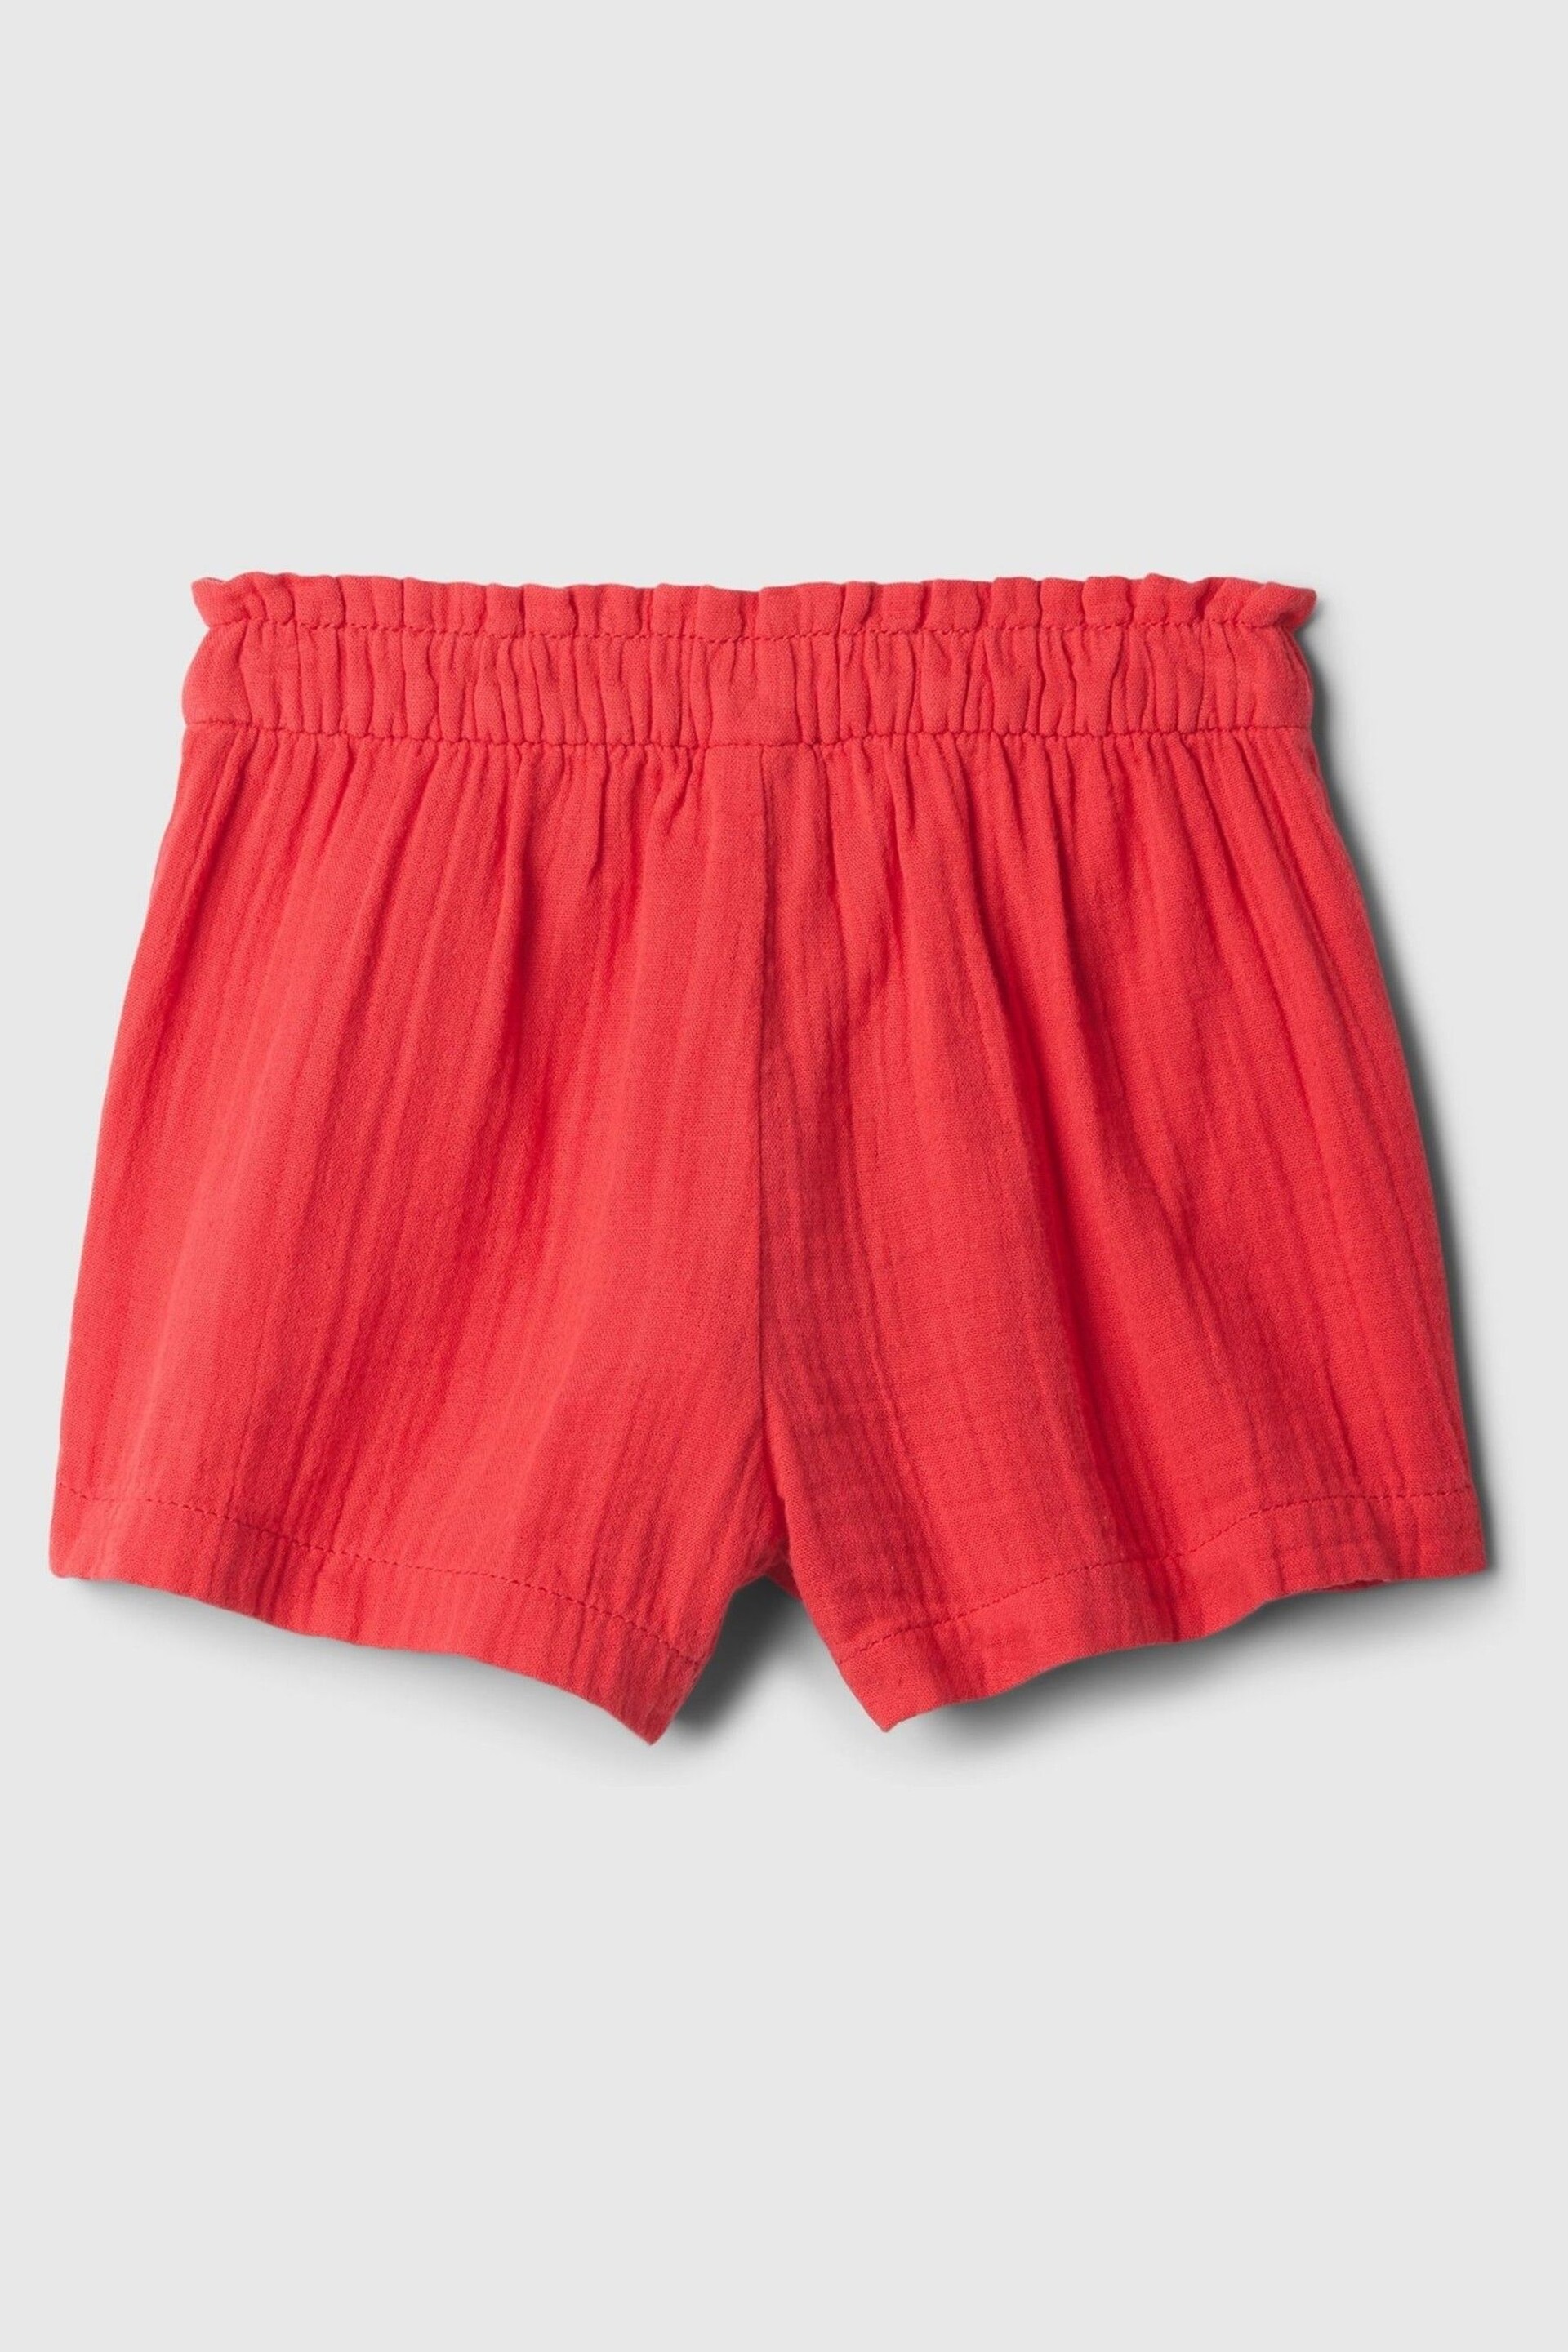 Gap Red Crinkle Cotton Pull On Baby Shorts (12mths-5yrs) - Image 2 of 2